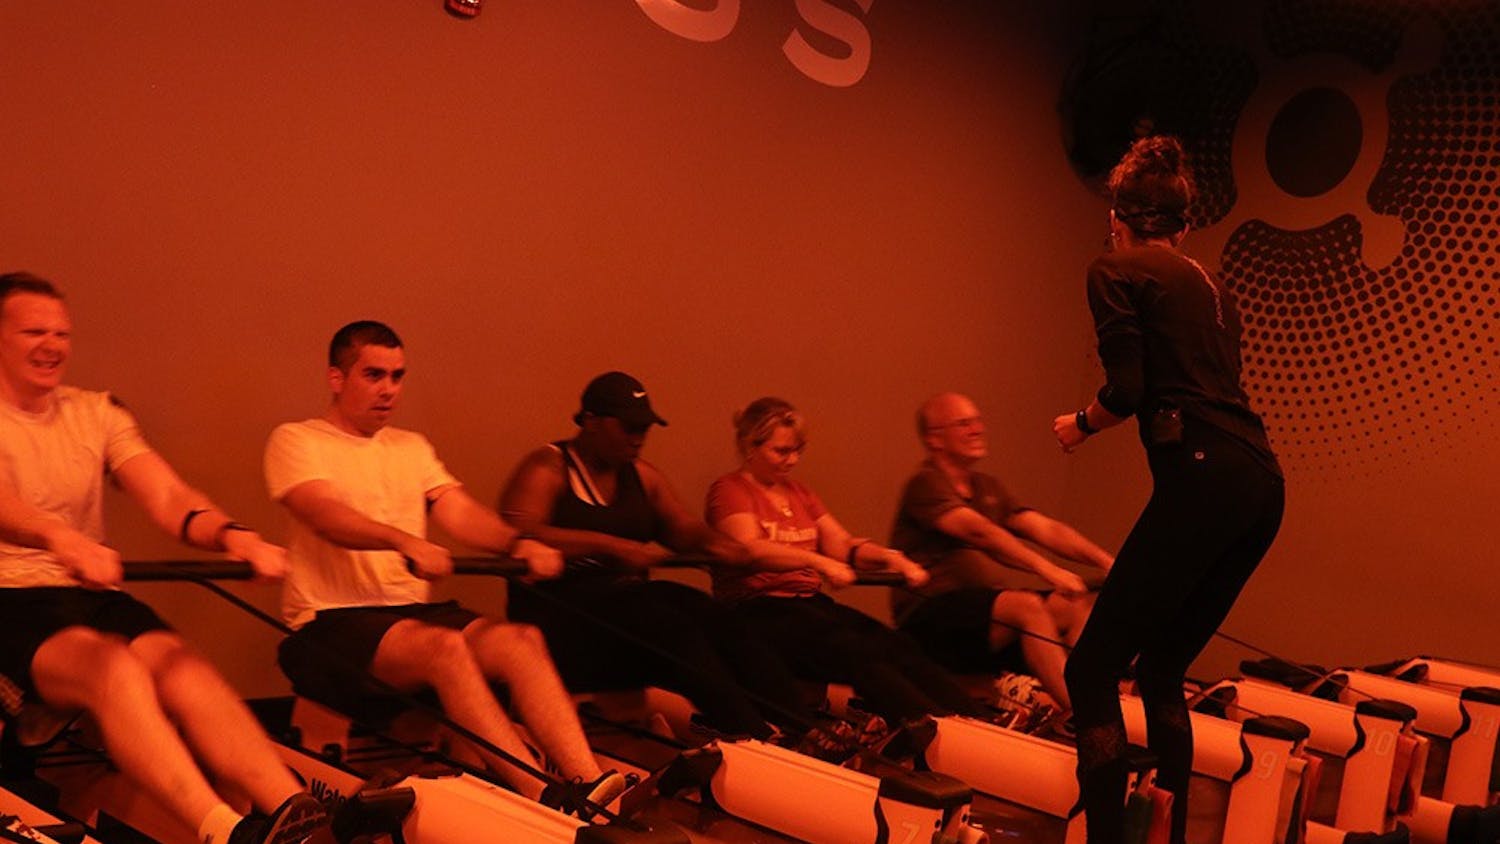 GALLERY: While the rest of the world sleeps, Orangetheory works out